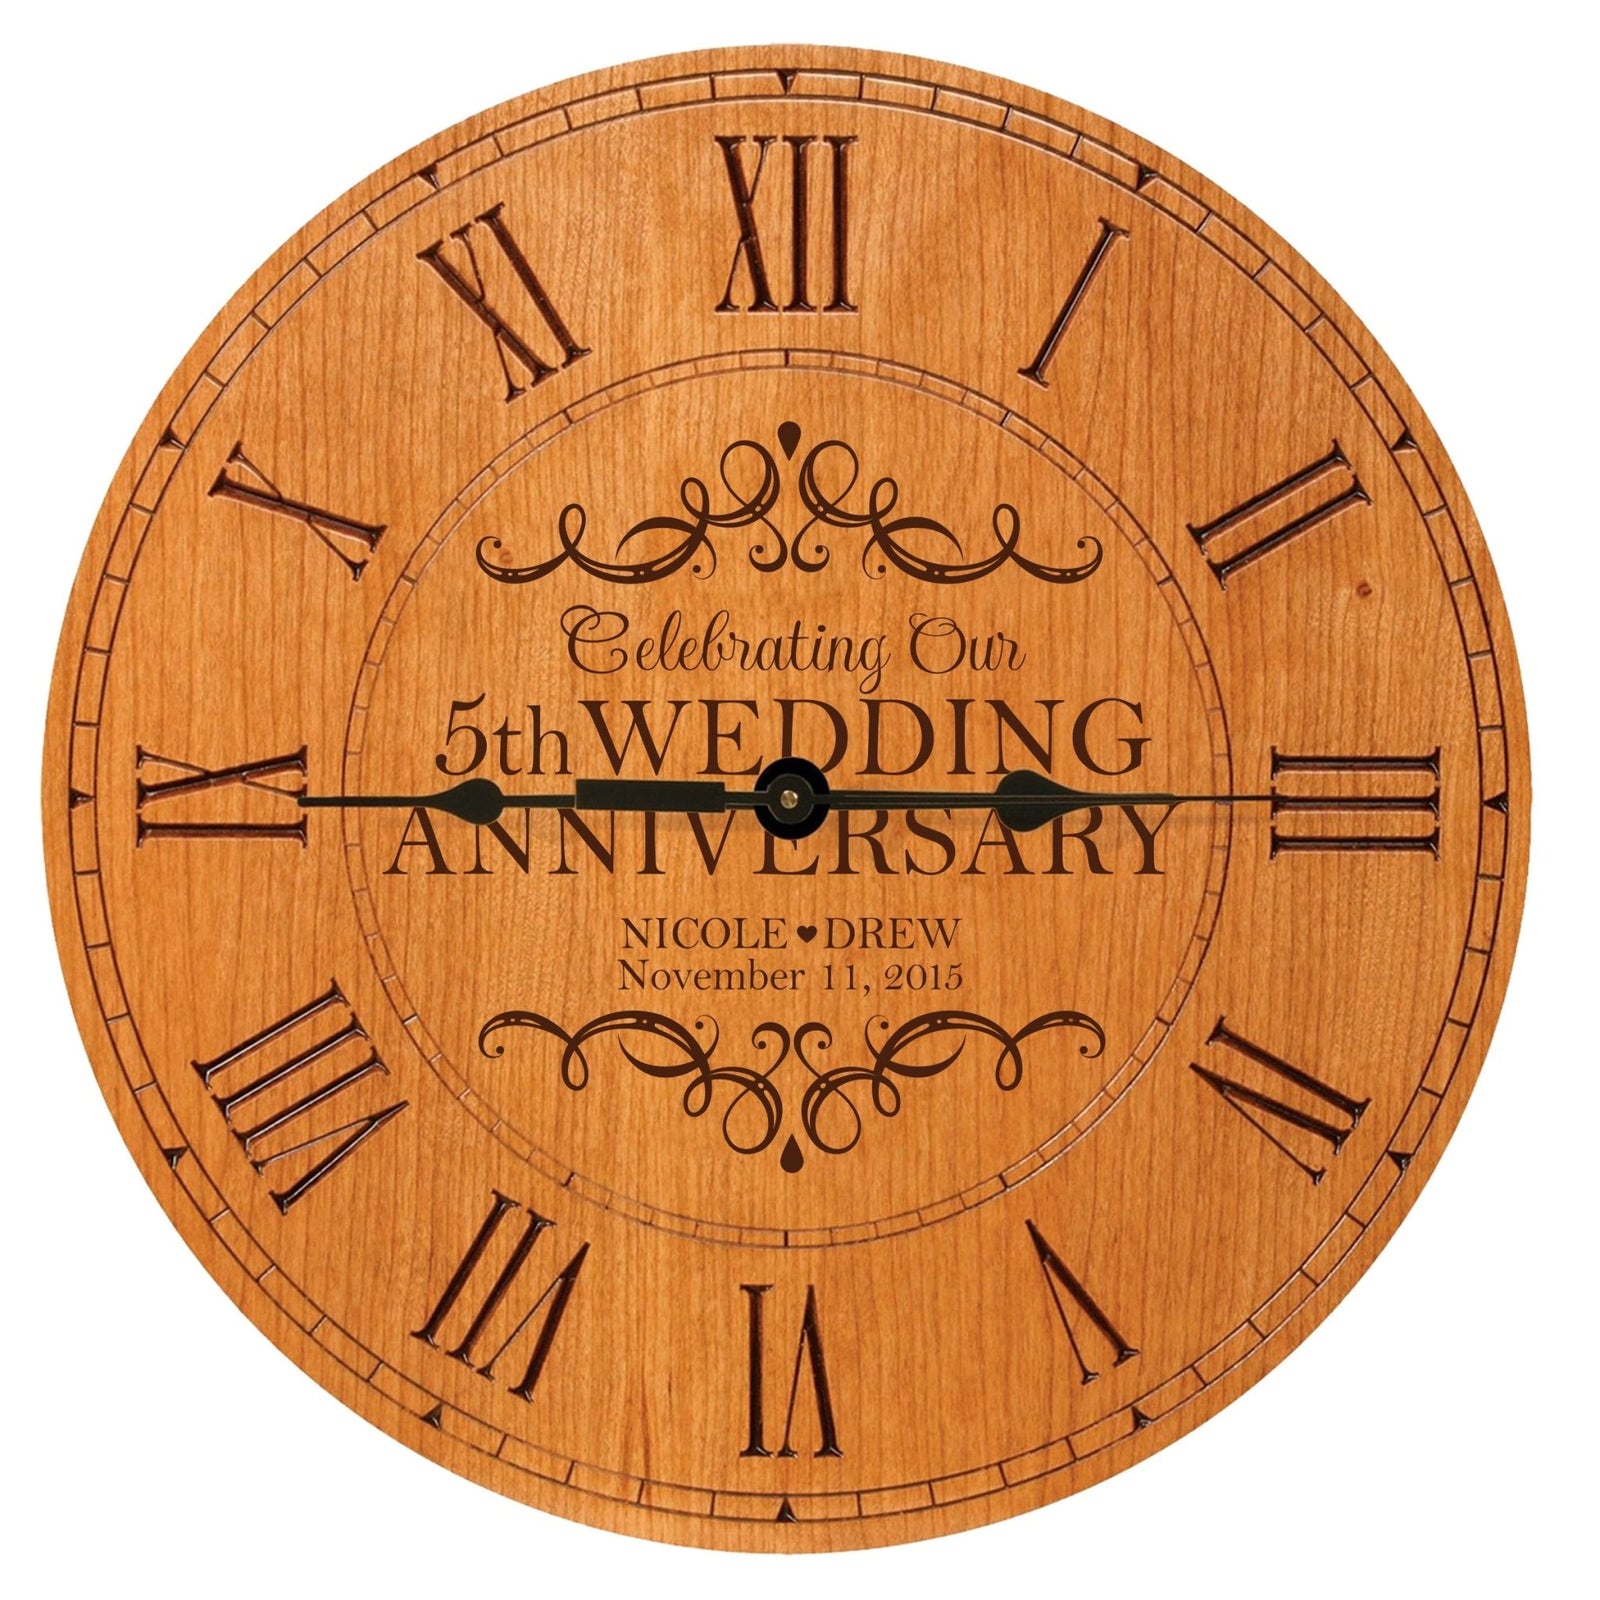 Personalized Engraved Wooden Wall Clock for 5th Wedding Anniversary Gift Ideas - LifeSong Milestones